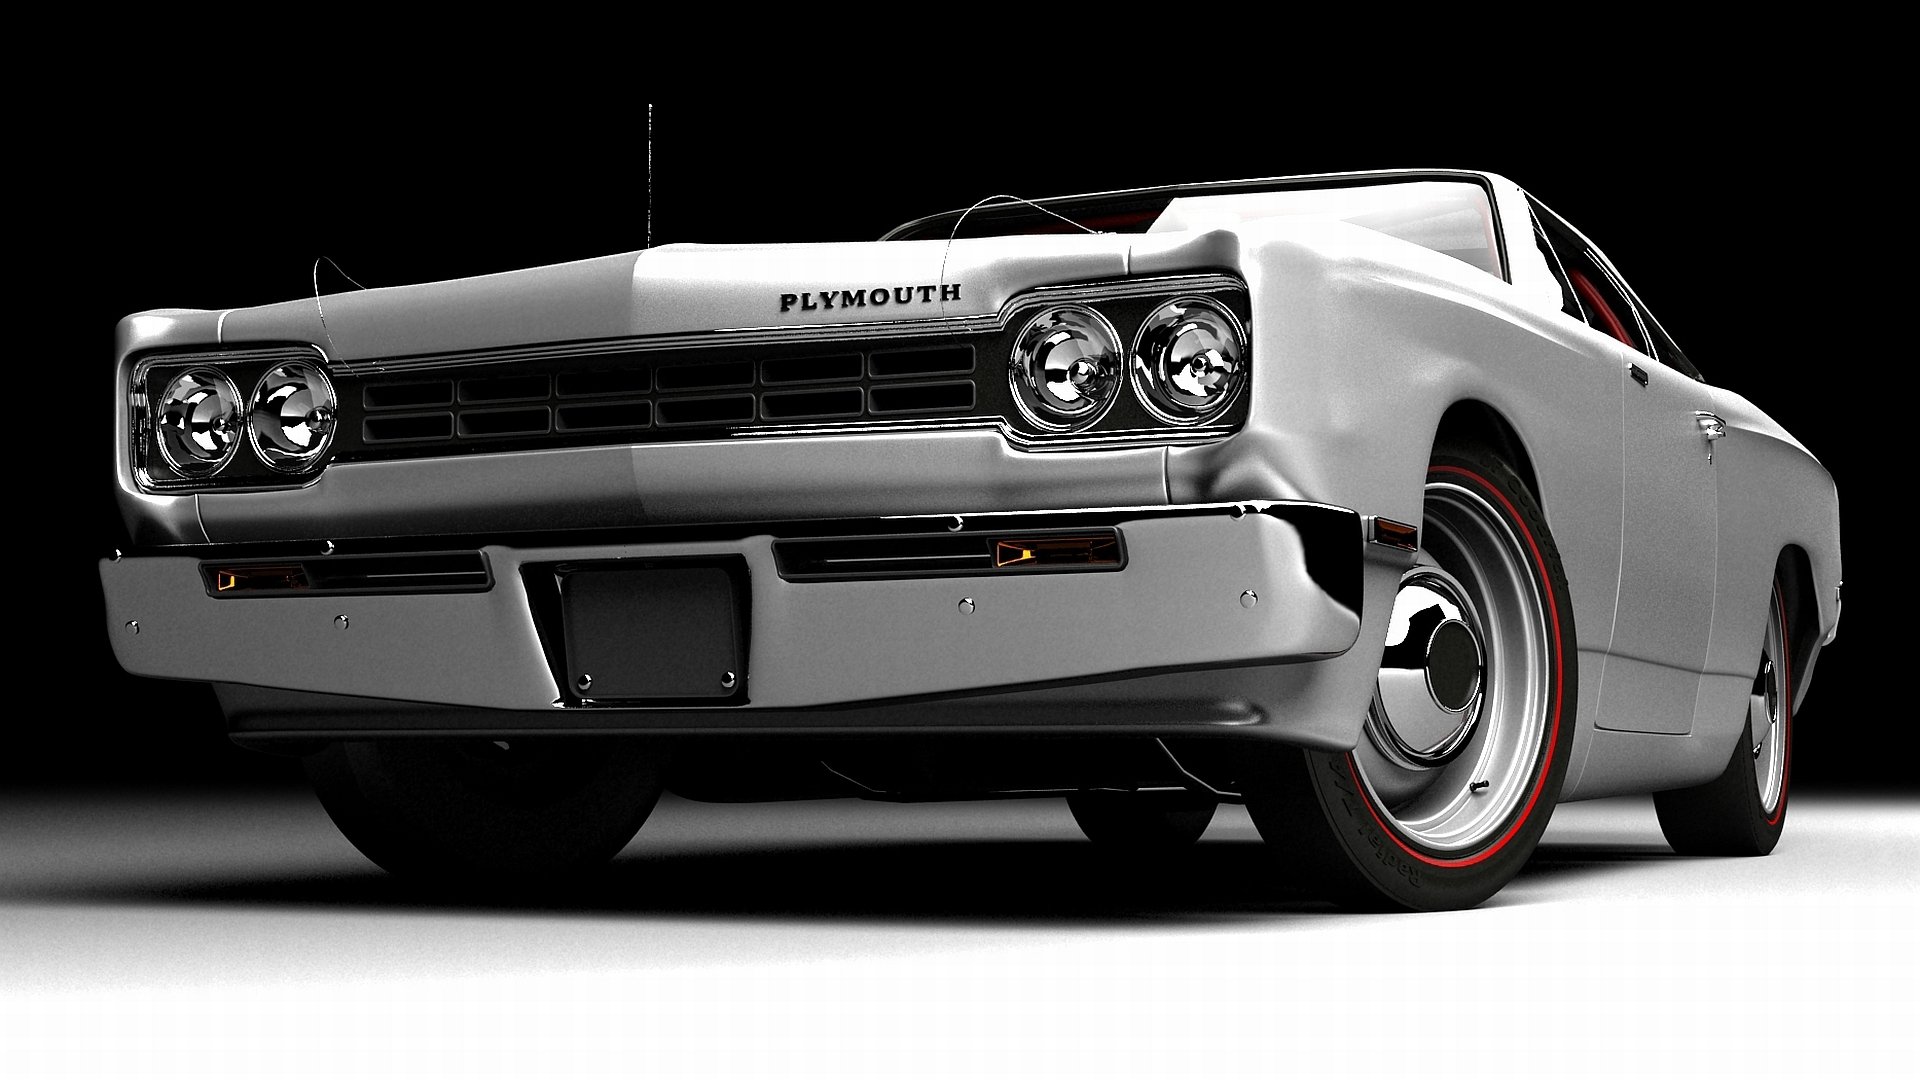 1969 Plymouth Roadrunner 839446 - Plymouth Road Runner Hd , HD Wallpaper & Backgrounds